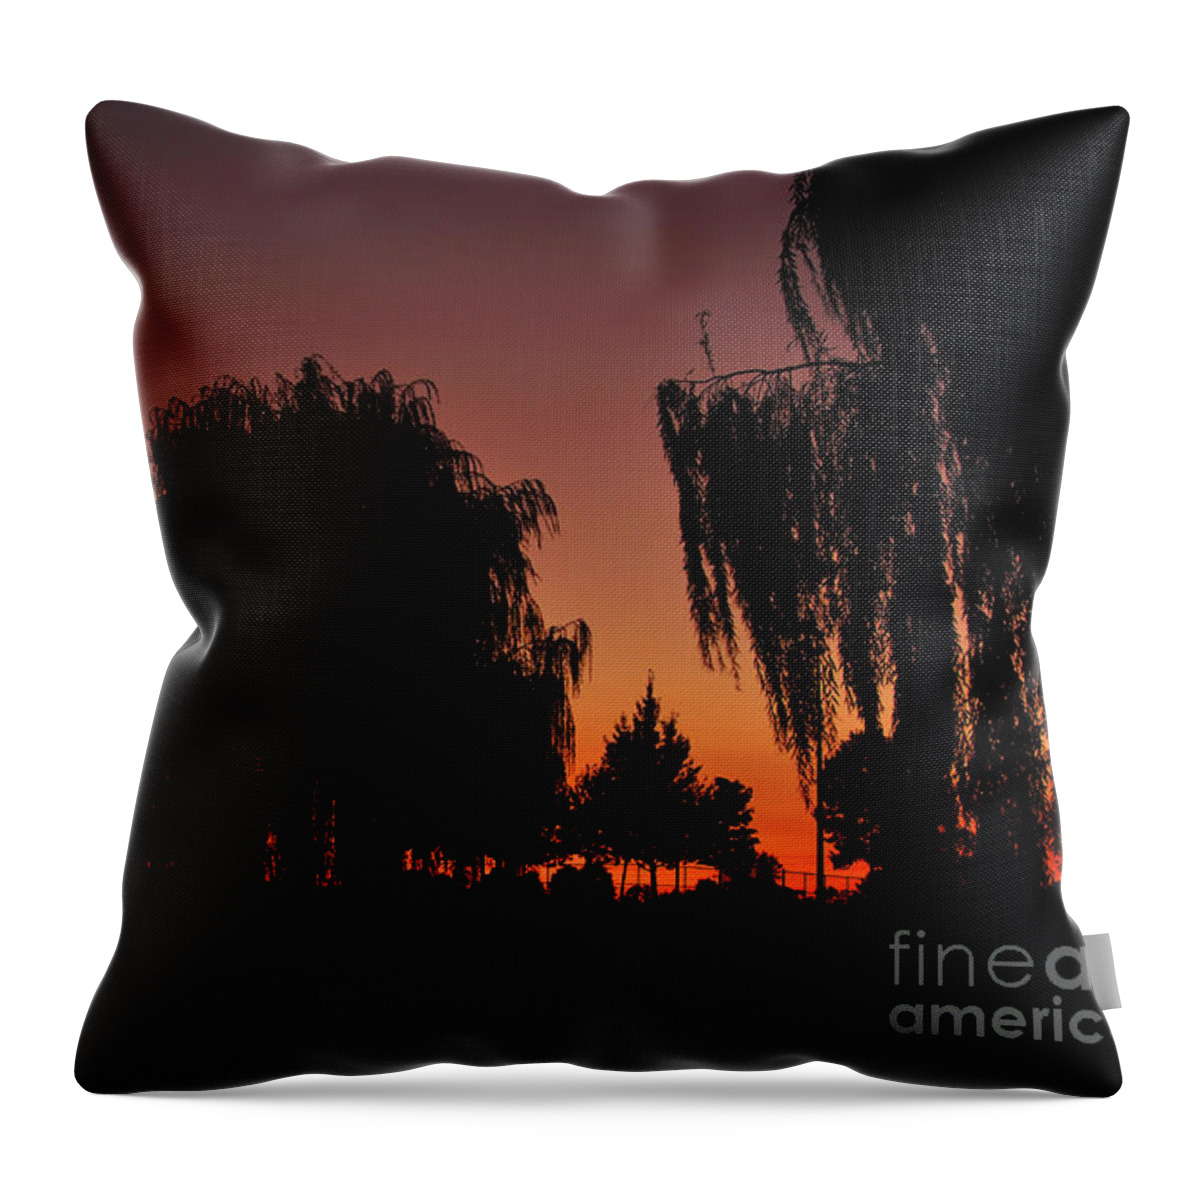 Leaves Throw Pillow featuring the photograph Willow Tree Silhouettes by Joe Ng